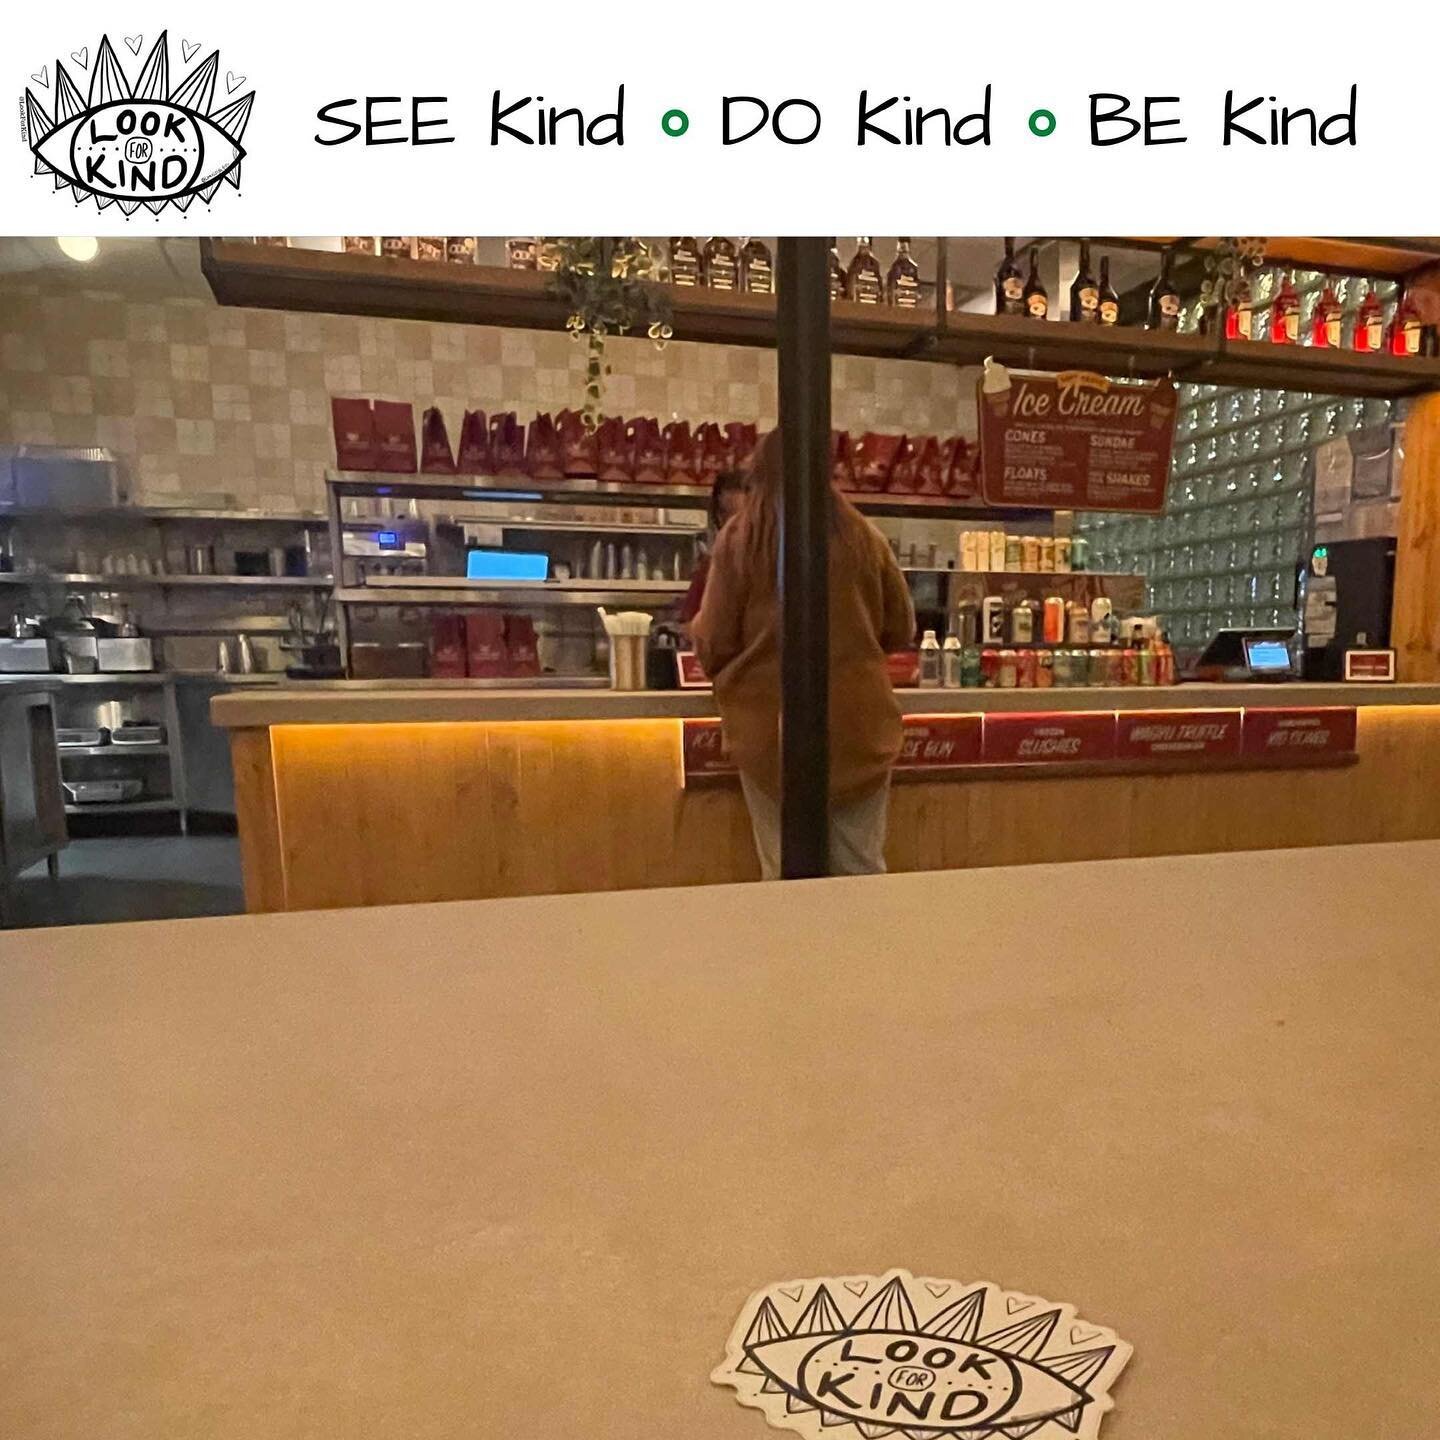 There&rsquo;s nothing small about it&hellip;.Now that was a burger! LFK ❤️s the people of Chicago and has fallen in love with @smallcheval🍔
****
SEE Kind. DO Kind. BE Kind.
****
#lookforkind 
#mentalheathmatters
#suicideprevention
#suicidehotline
#9